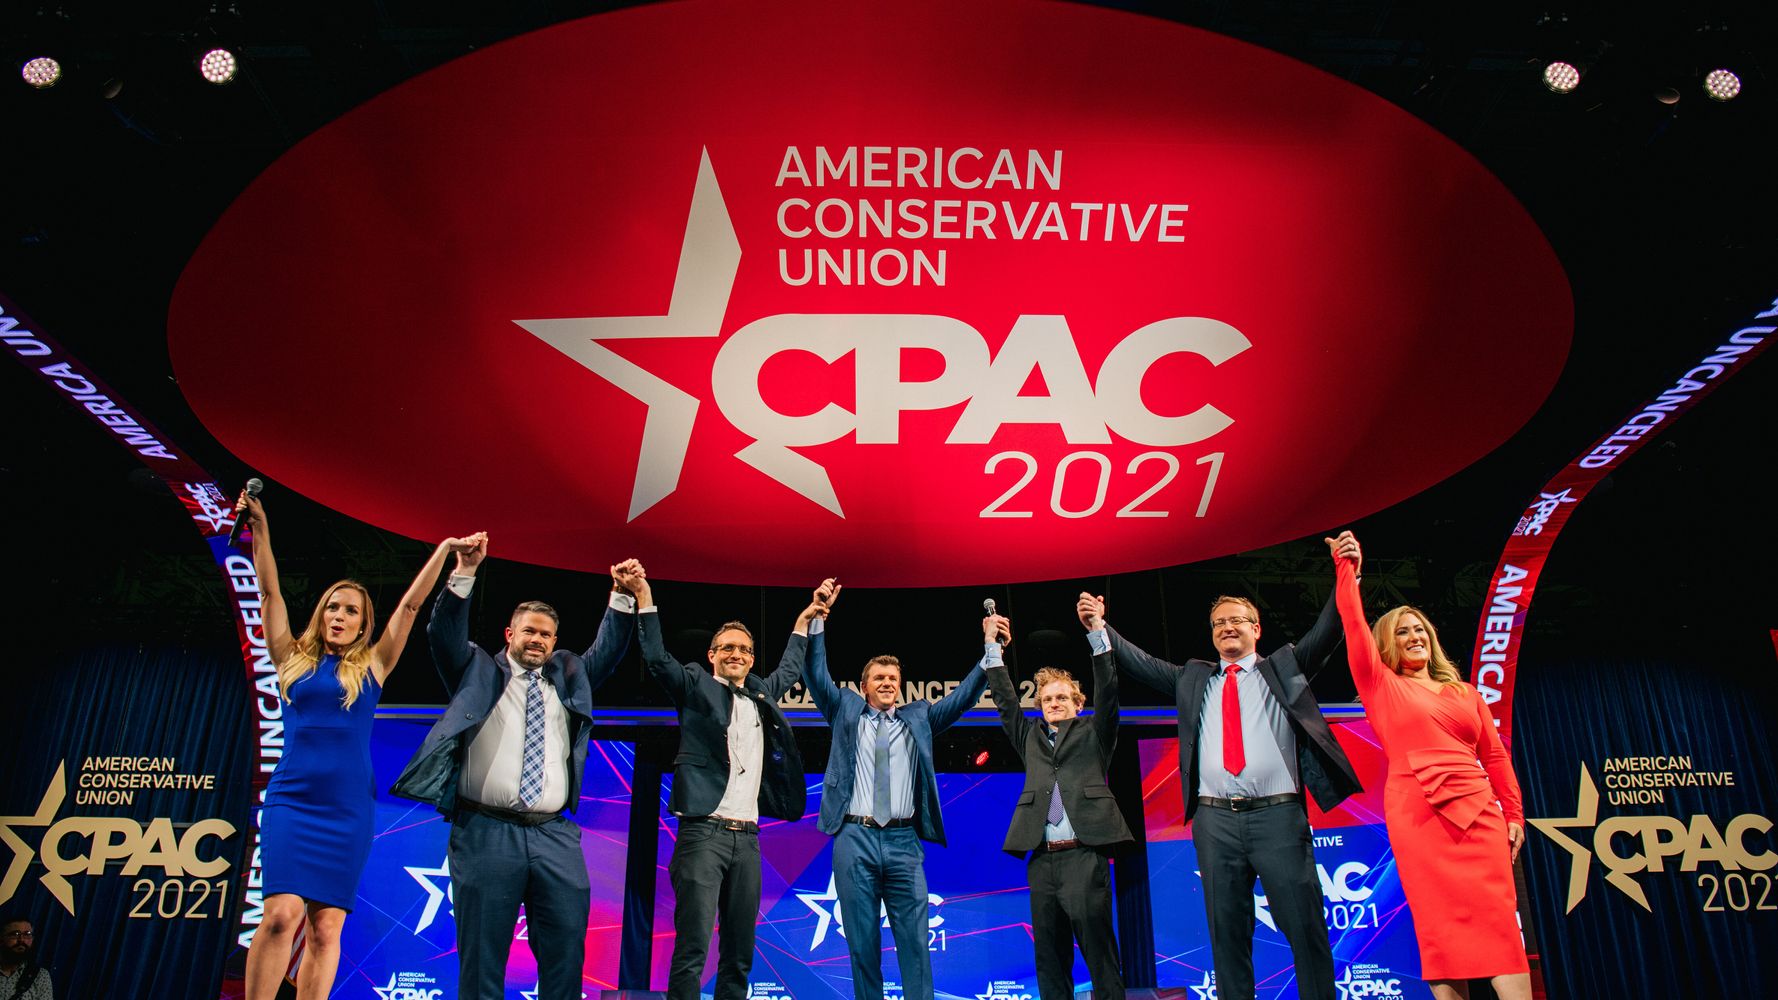 People Think There's Something X-Rated About The Shape Of The CPAC Stage